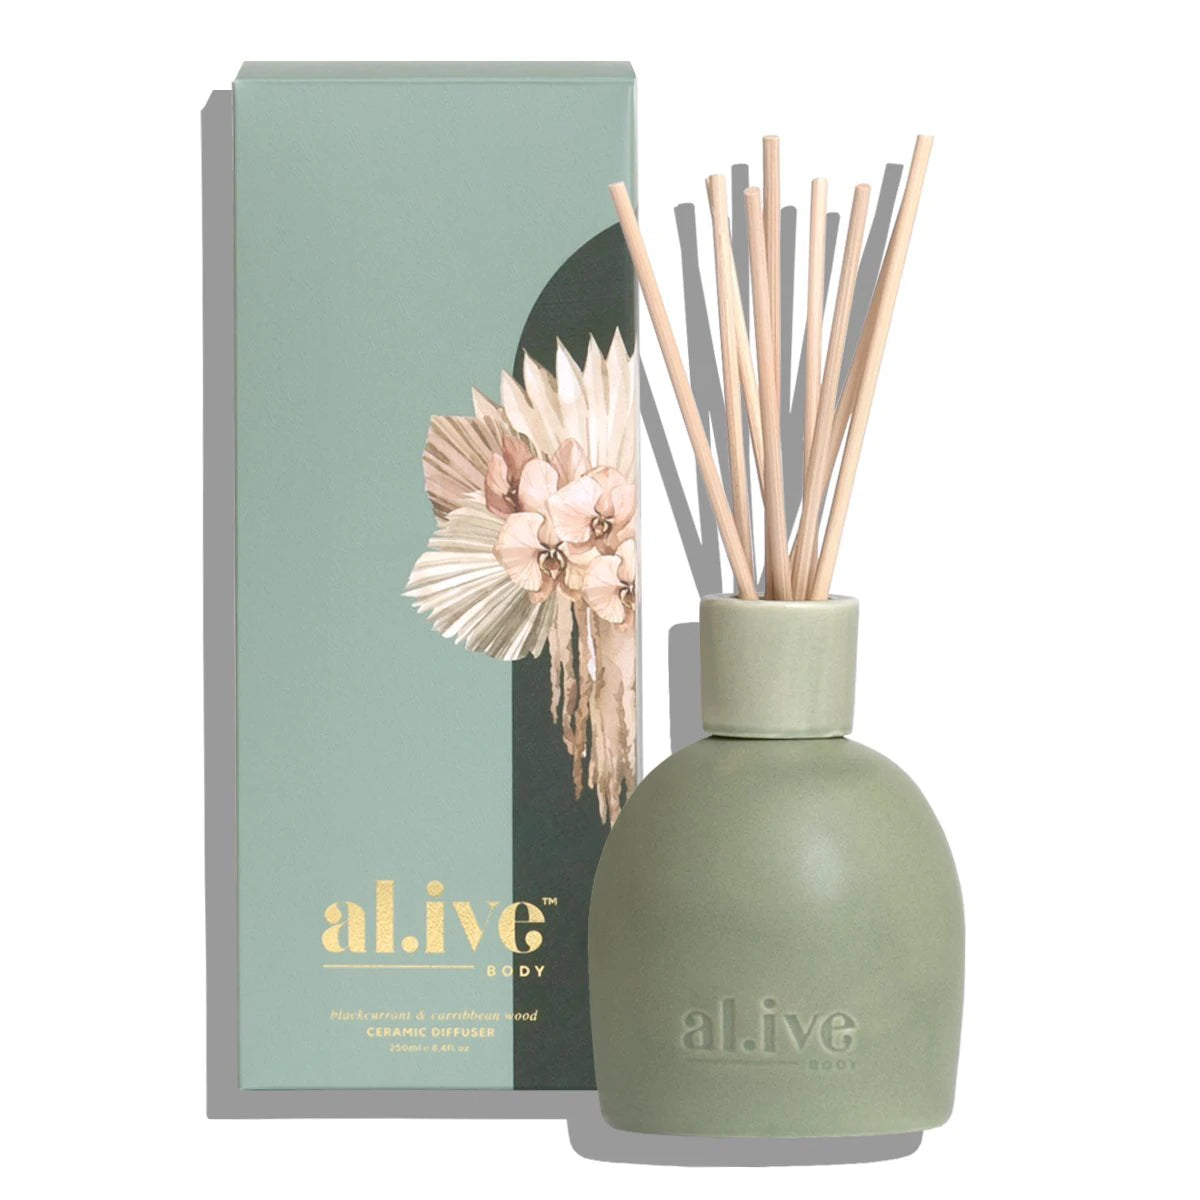 ALIVE BODY blackcurrant caribbean wood diffuser | ALIVE BODY  | the ivy plant studio 